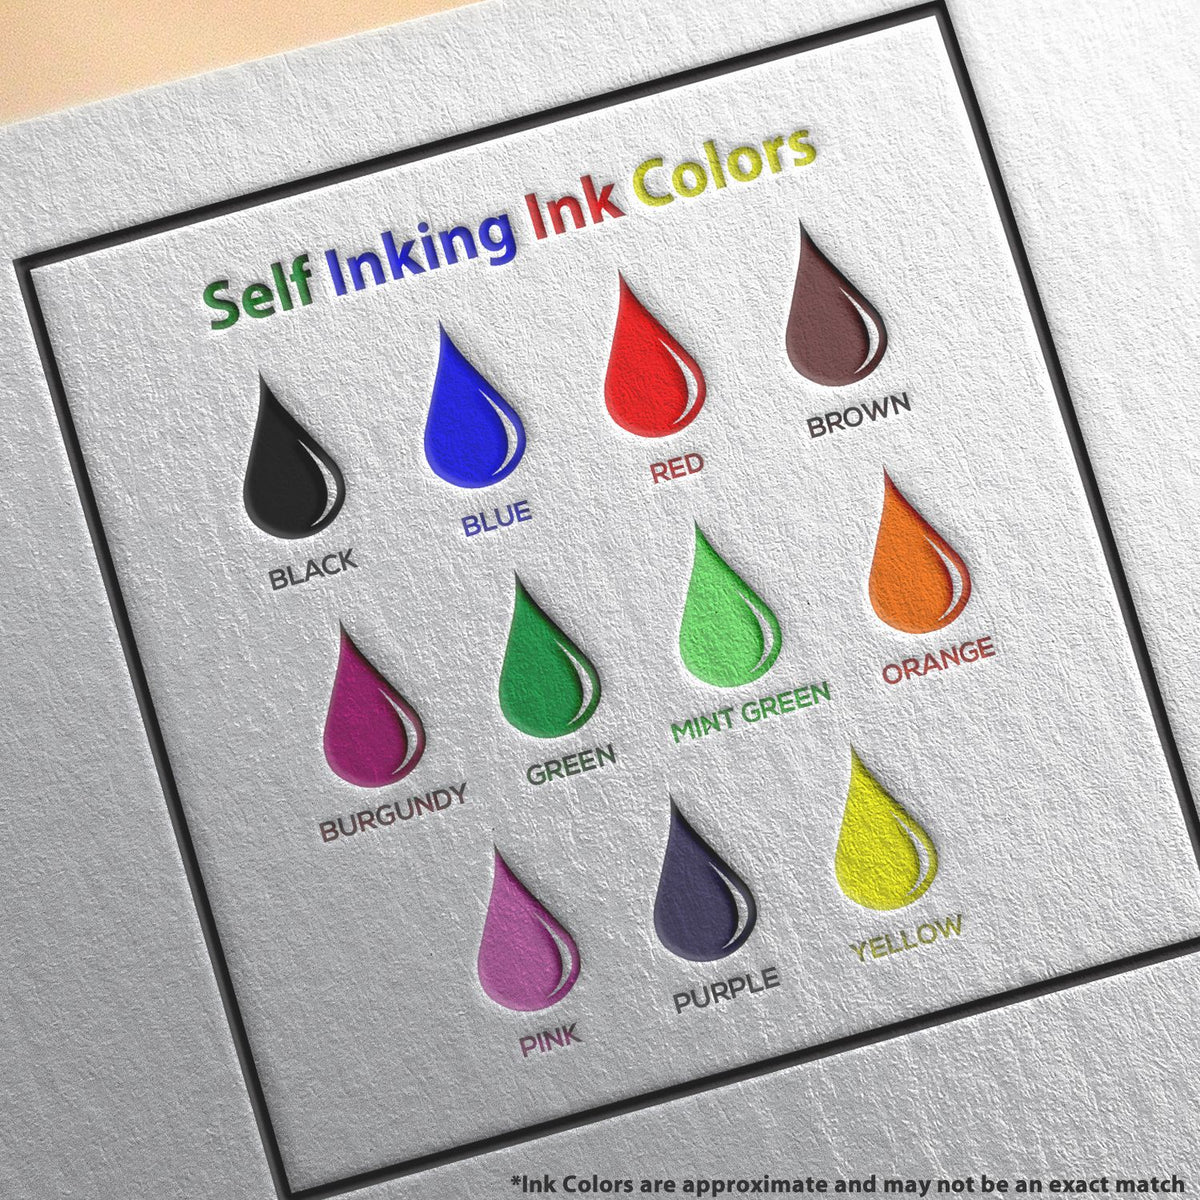 A picture showing the different ink colors or hues available for the Self-Inking South Carolina Landscape Architect Stamp product.